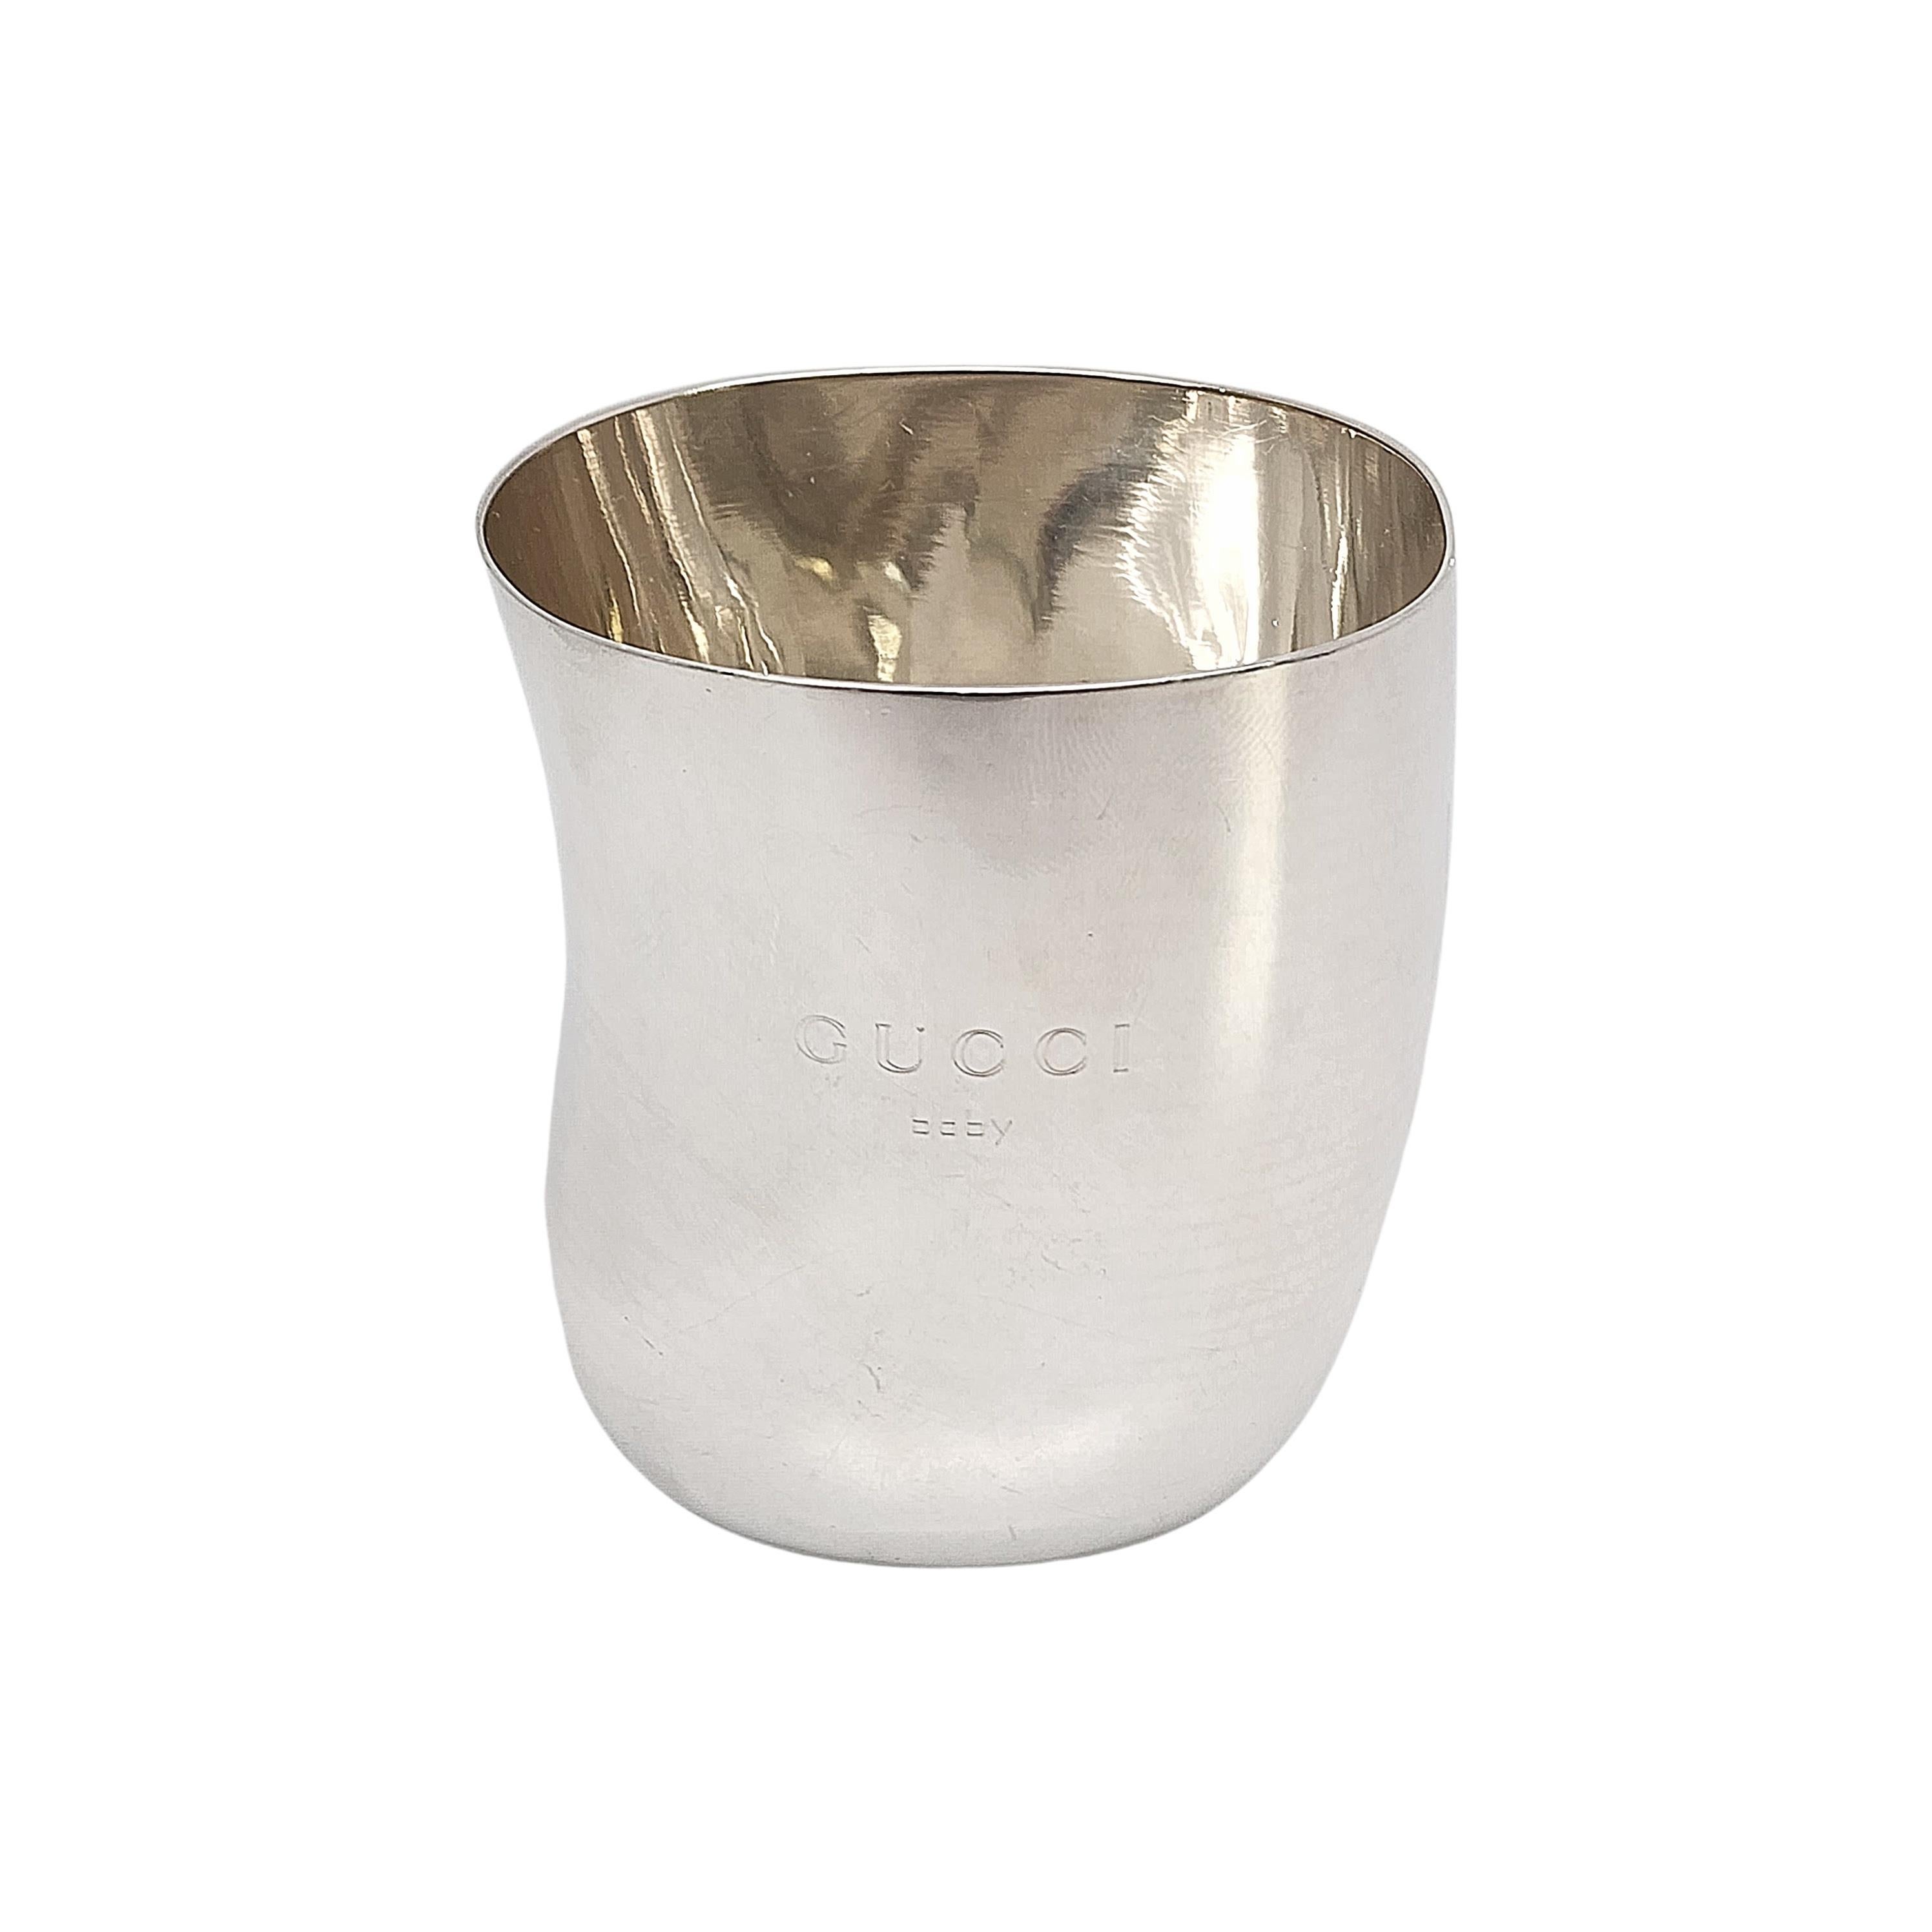 Vintage Gucci sterling silver baby cup.

No monogram

From the Tom Ford Era at Gucci, circa 1990's, this baby cup is engraved with 